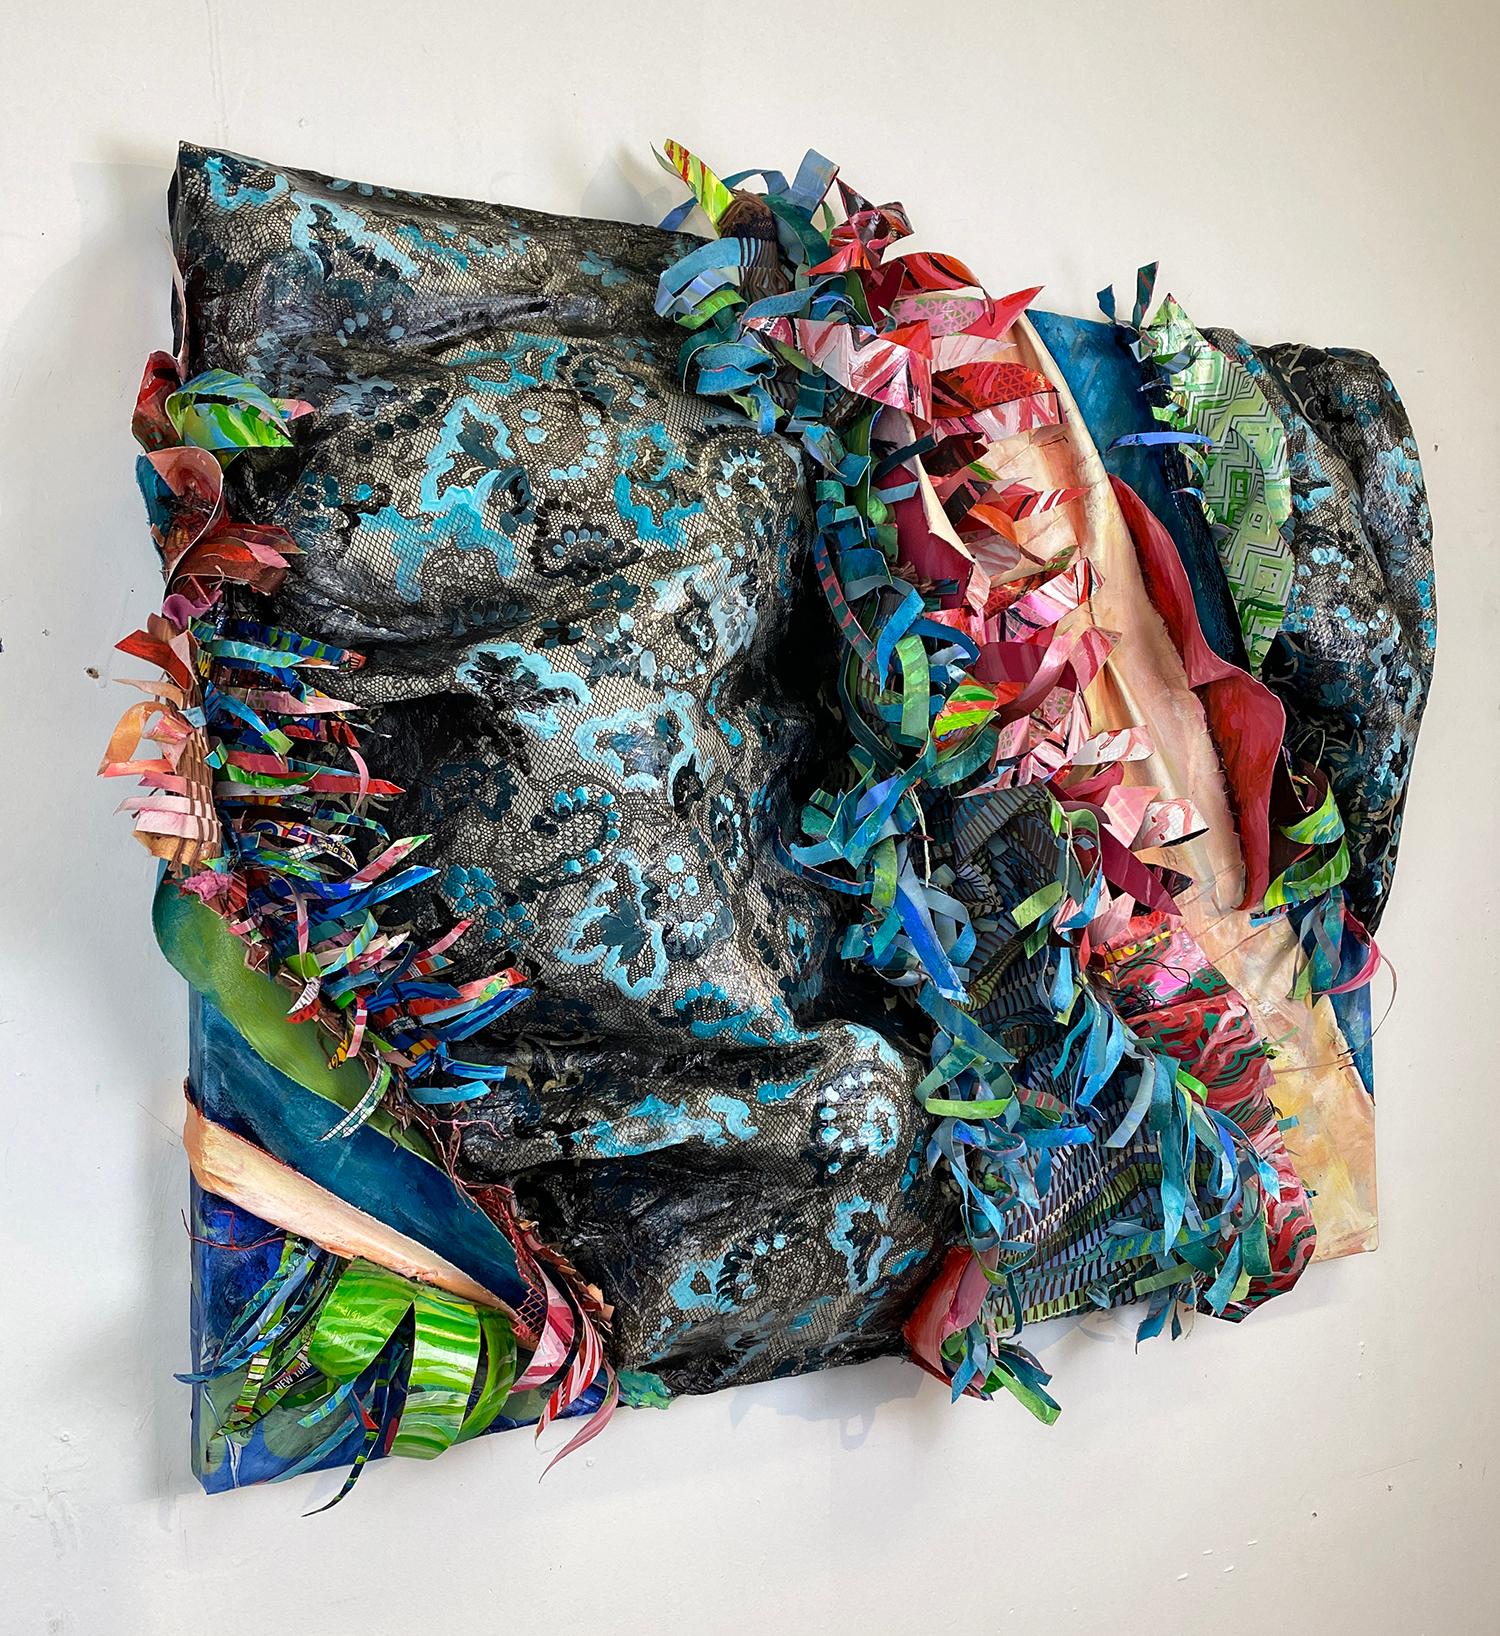 Mixed Media Sculptural Abstract in blue, black and pink by Christina Massey  1